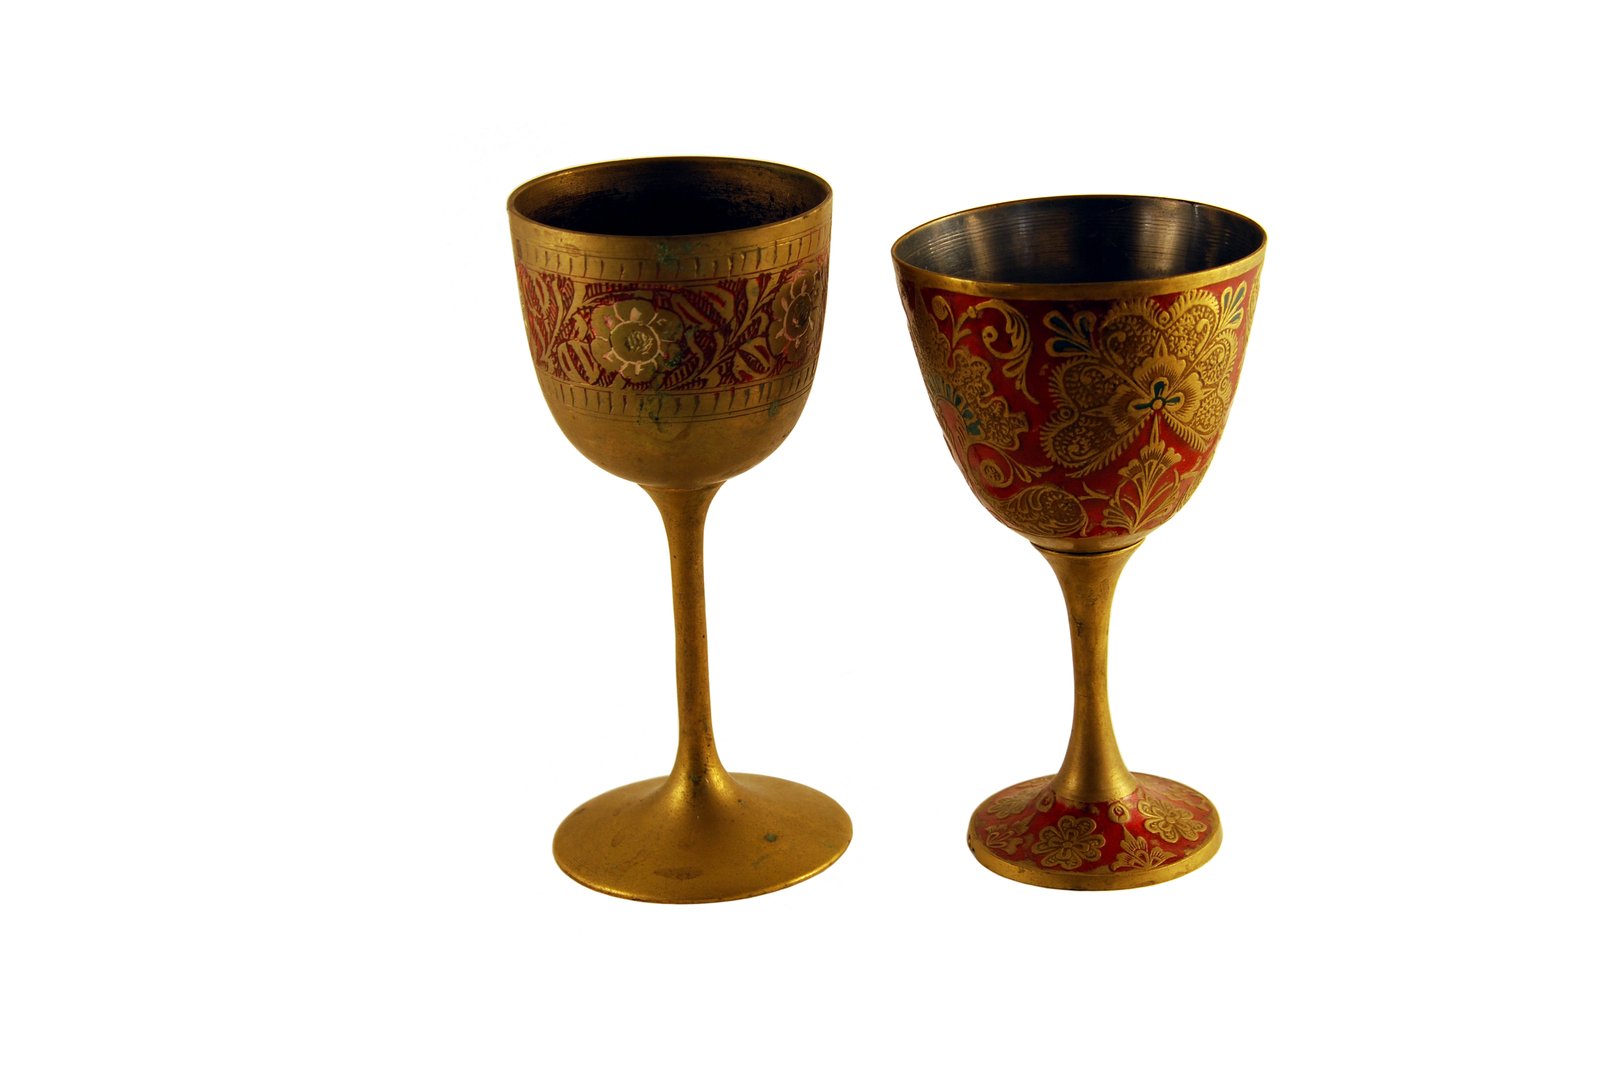 two golden goblets are set on a white background